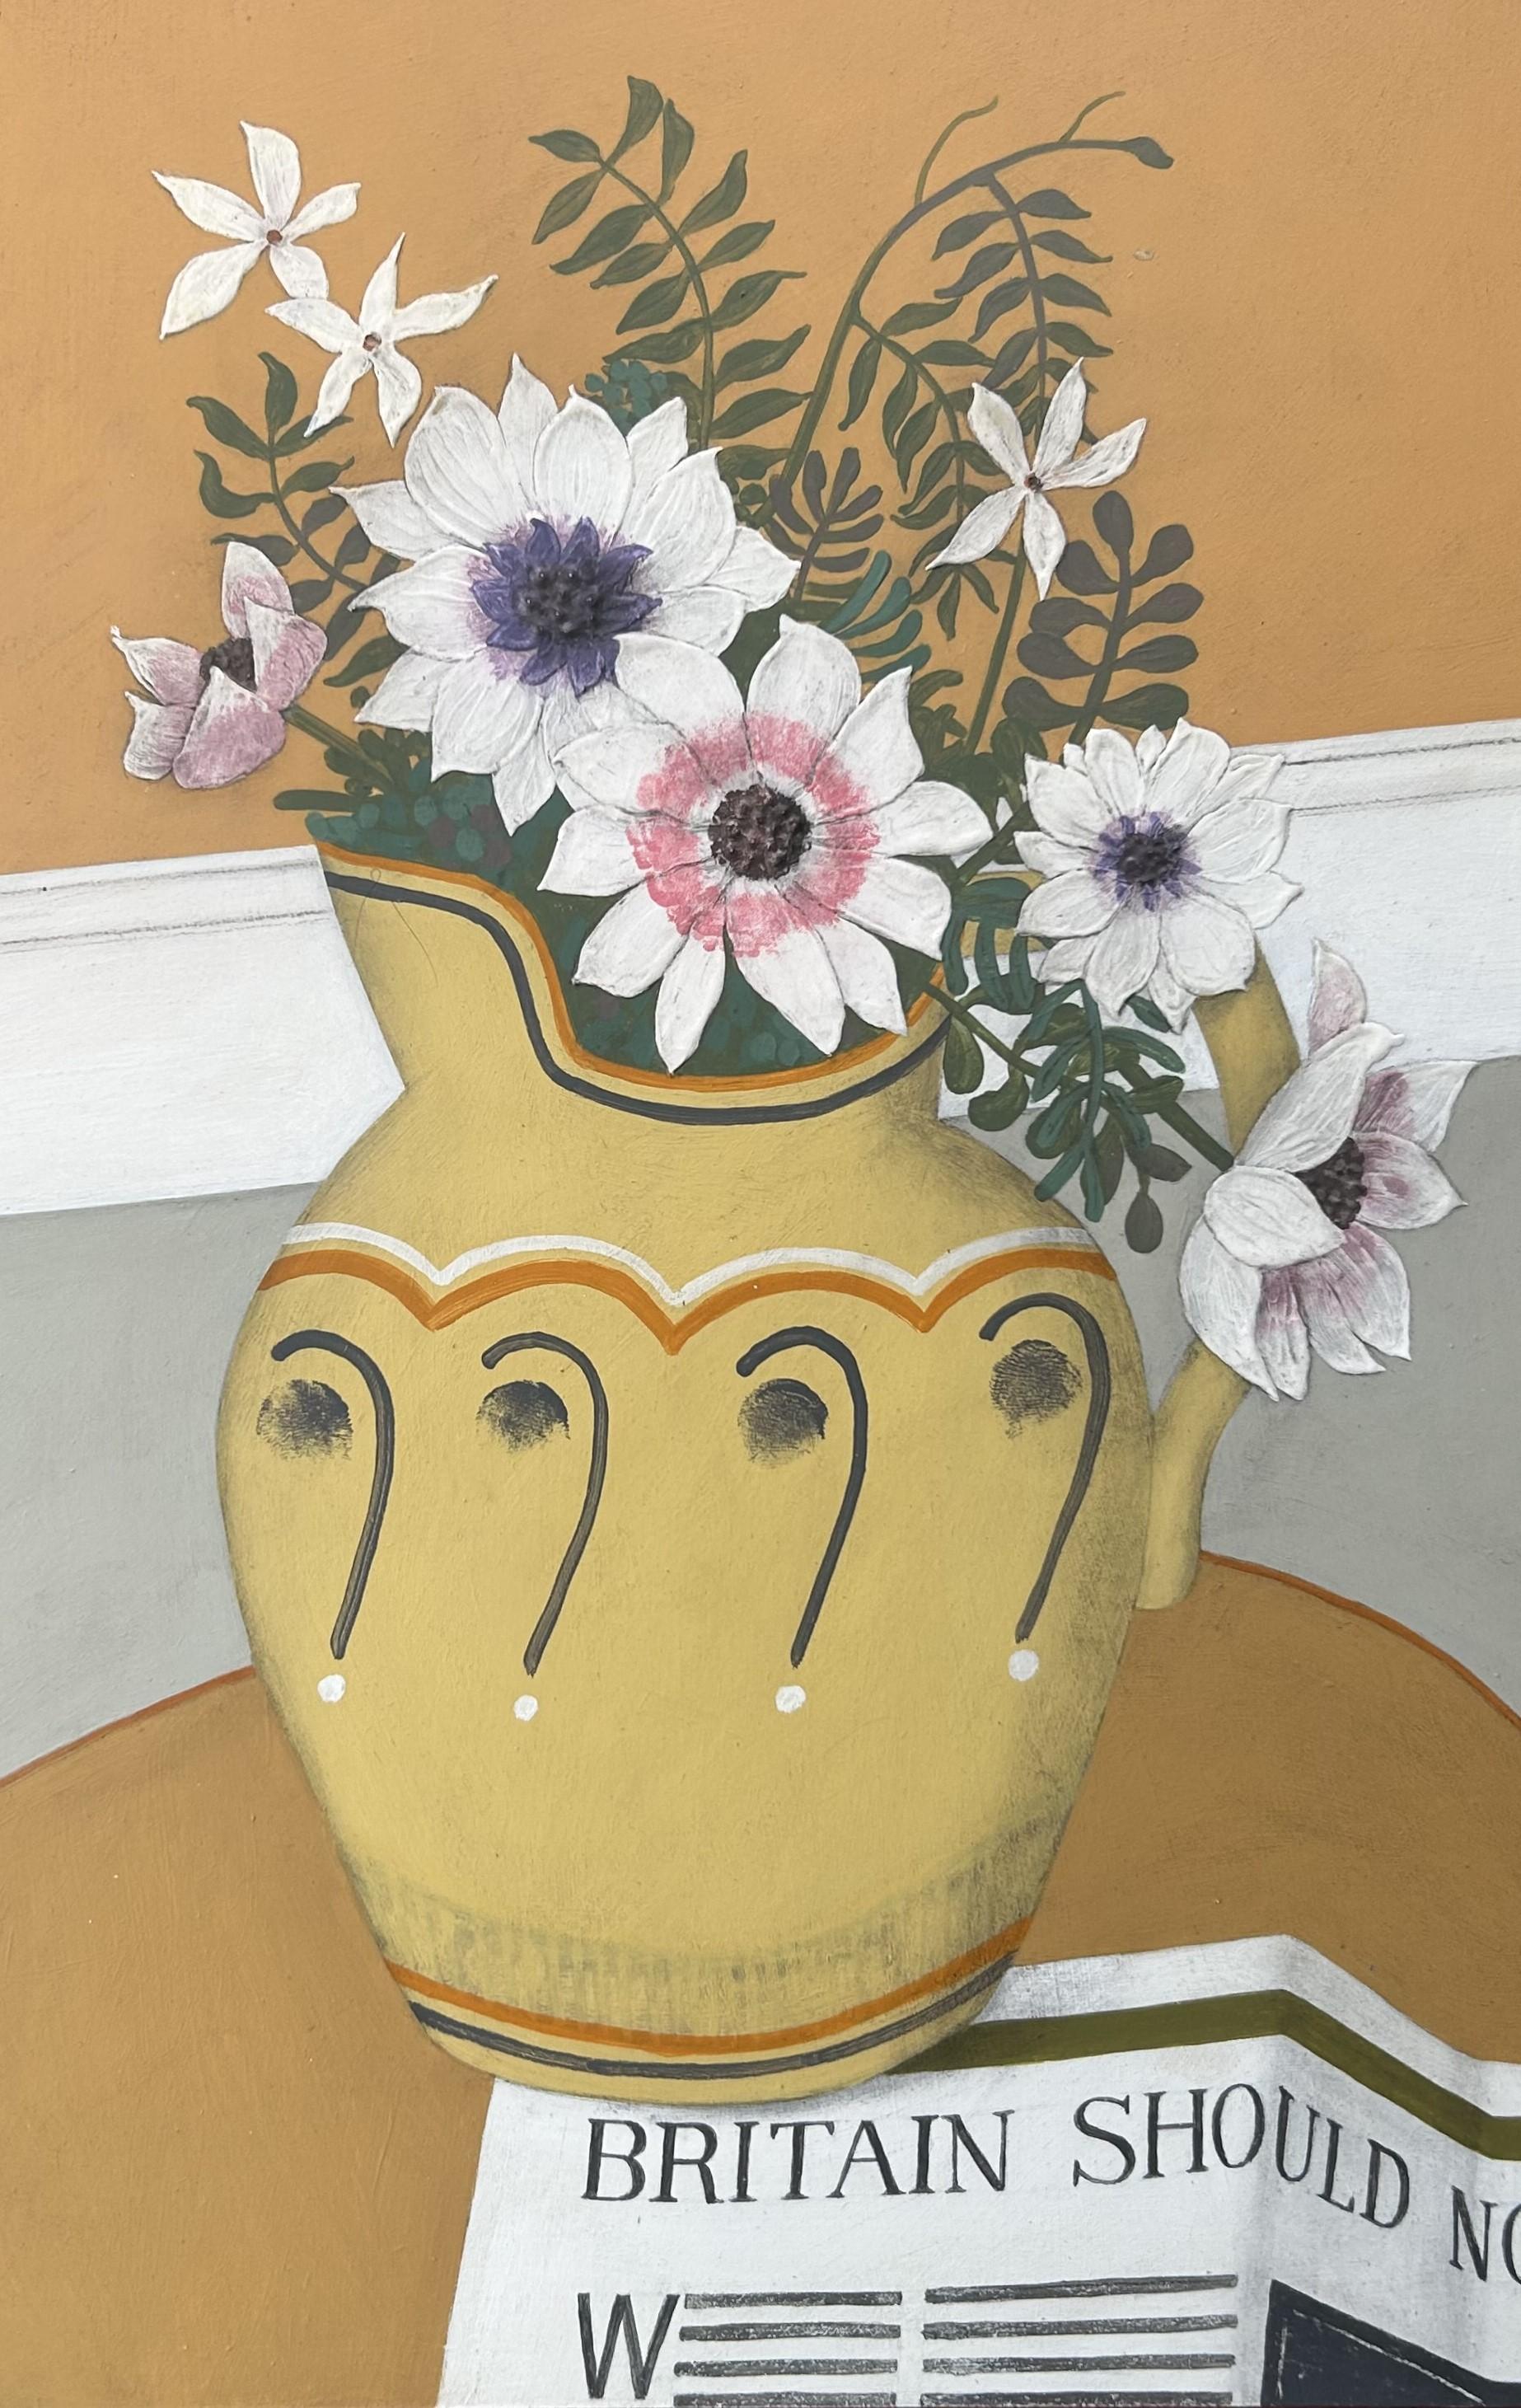 ROBINSON, Geoffrey (b.1945)
Yellow Jug
50.7 x 40.6 cm
c.2000
Oil on board,  Unframed 

Geoffrey Robinson trained at Bournemouth College of Art in the 1960’s, before a career in advertising and music. Since the 1990’s he began a full time painting